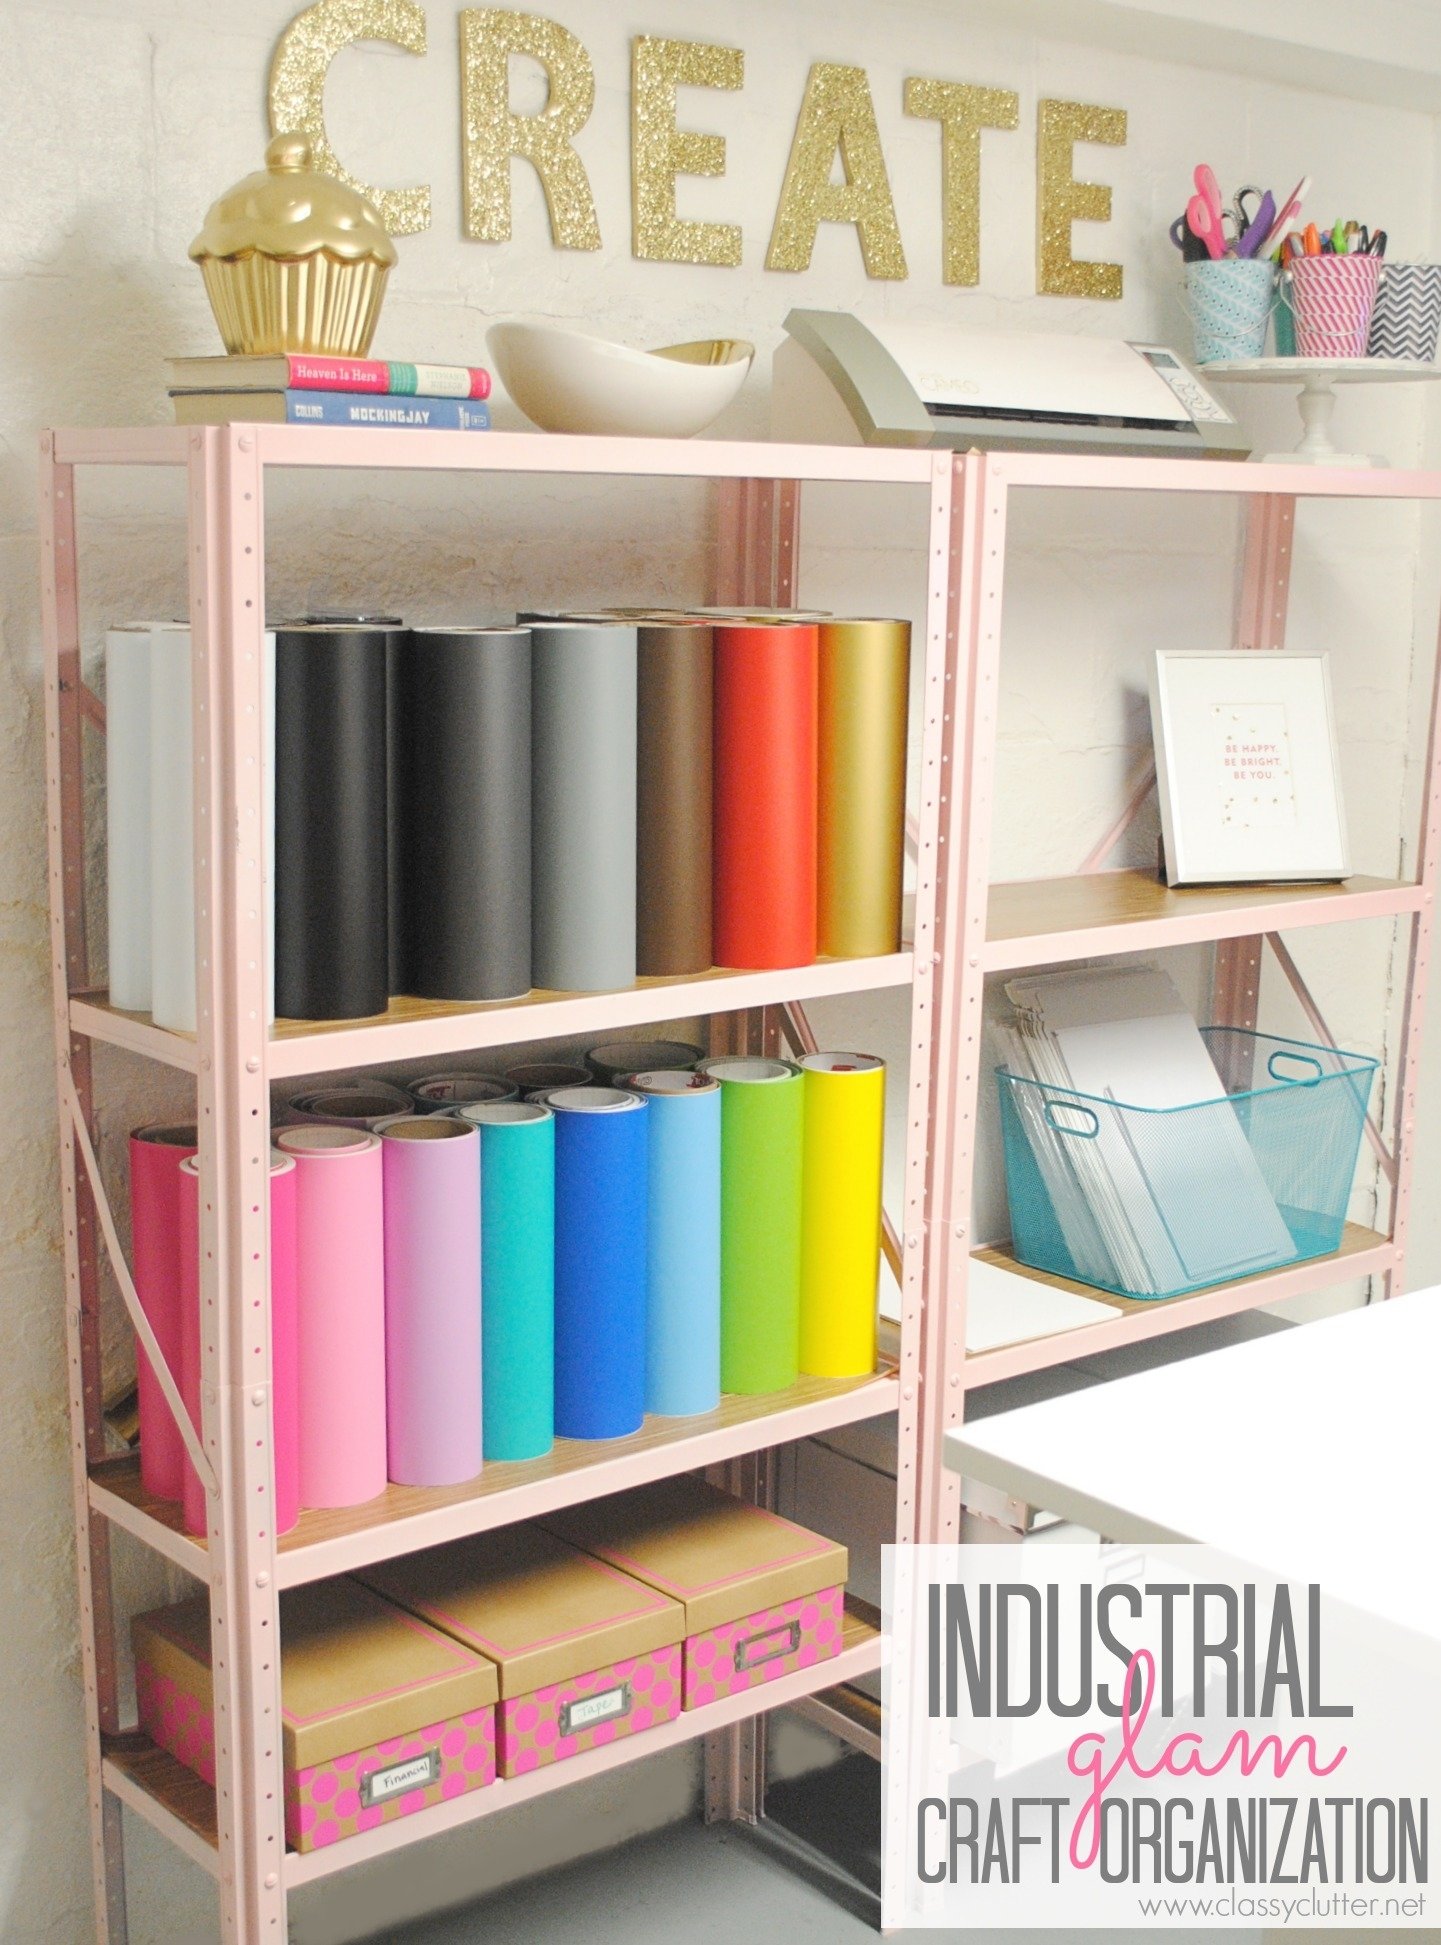 10 Stunning Craft Room Ideas On A Budget inexpensive craft room shelving classy clutter 2023